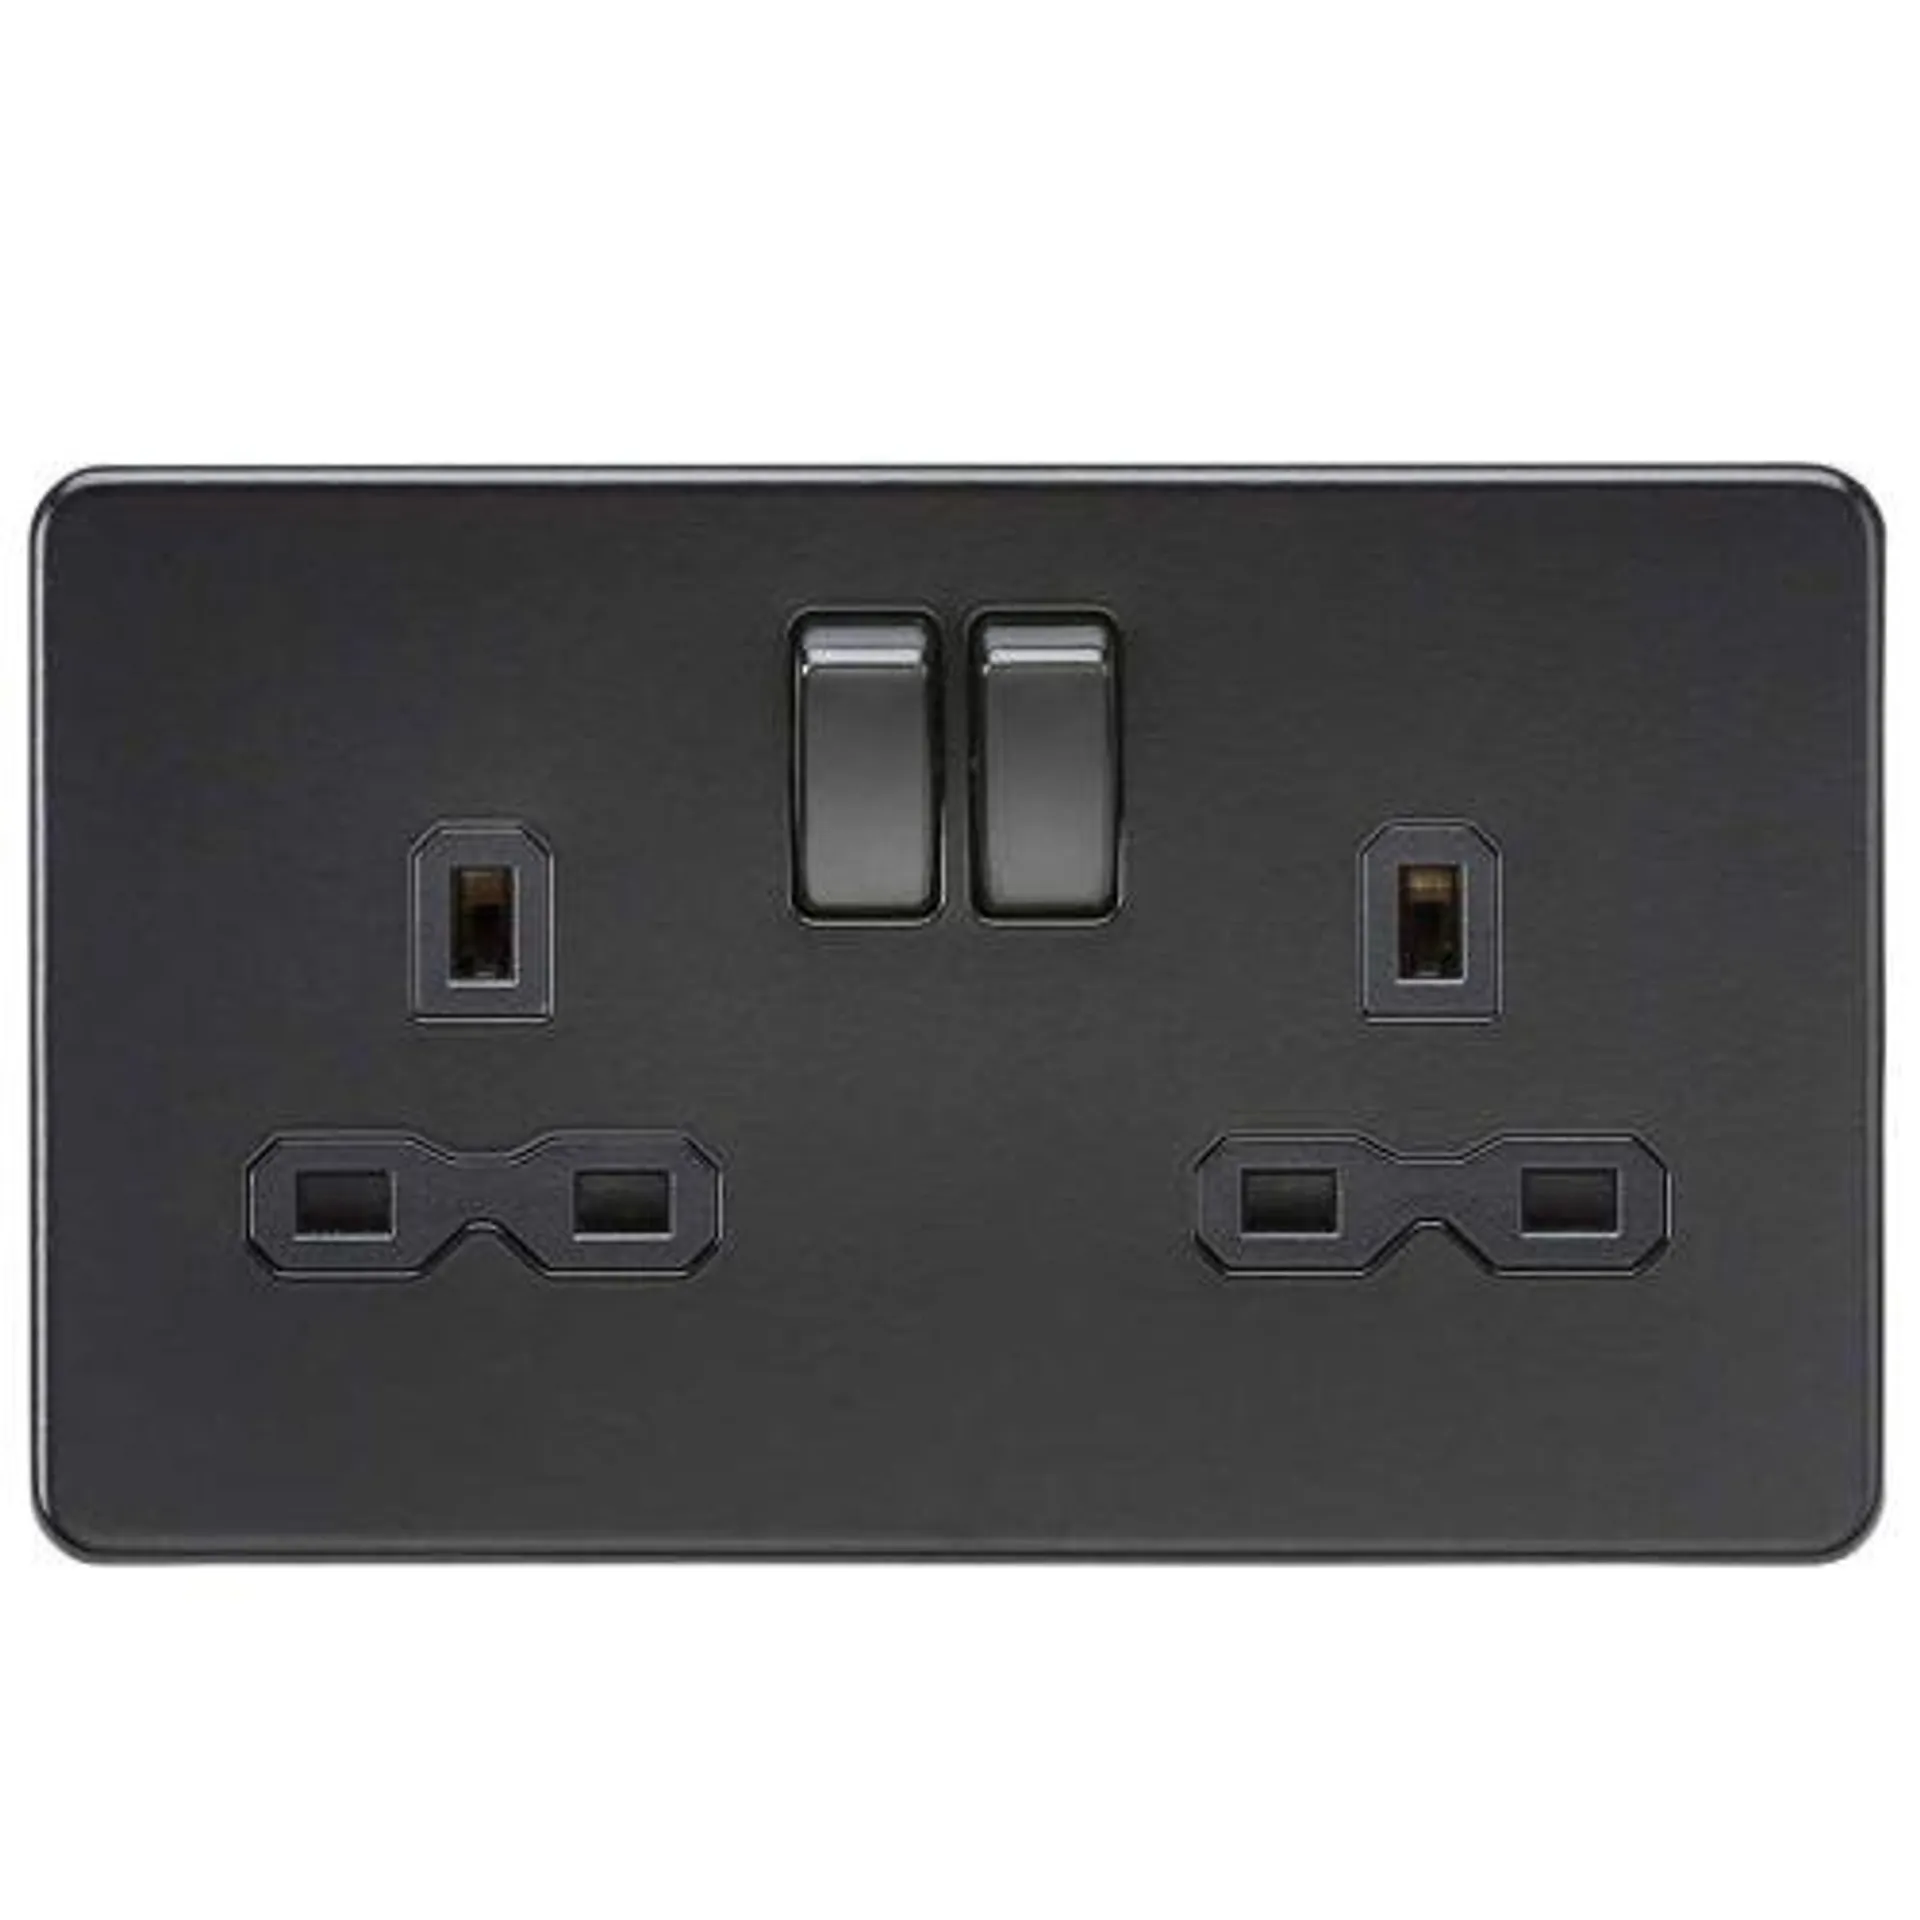 2 Gang Switched Socket with Insert 13A - Matt Black